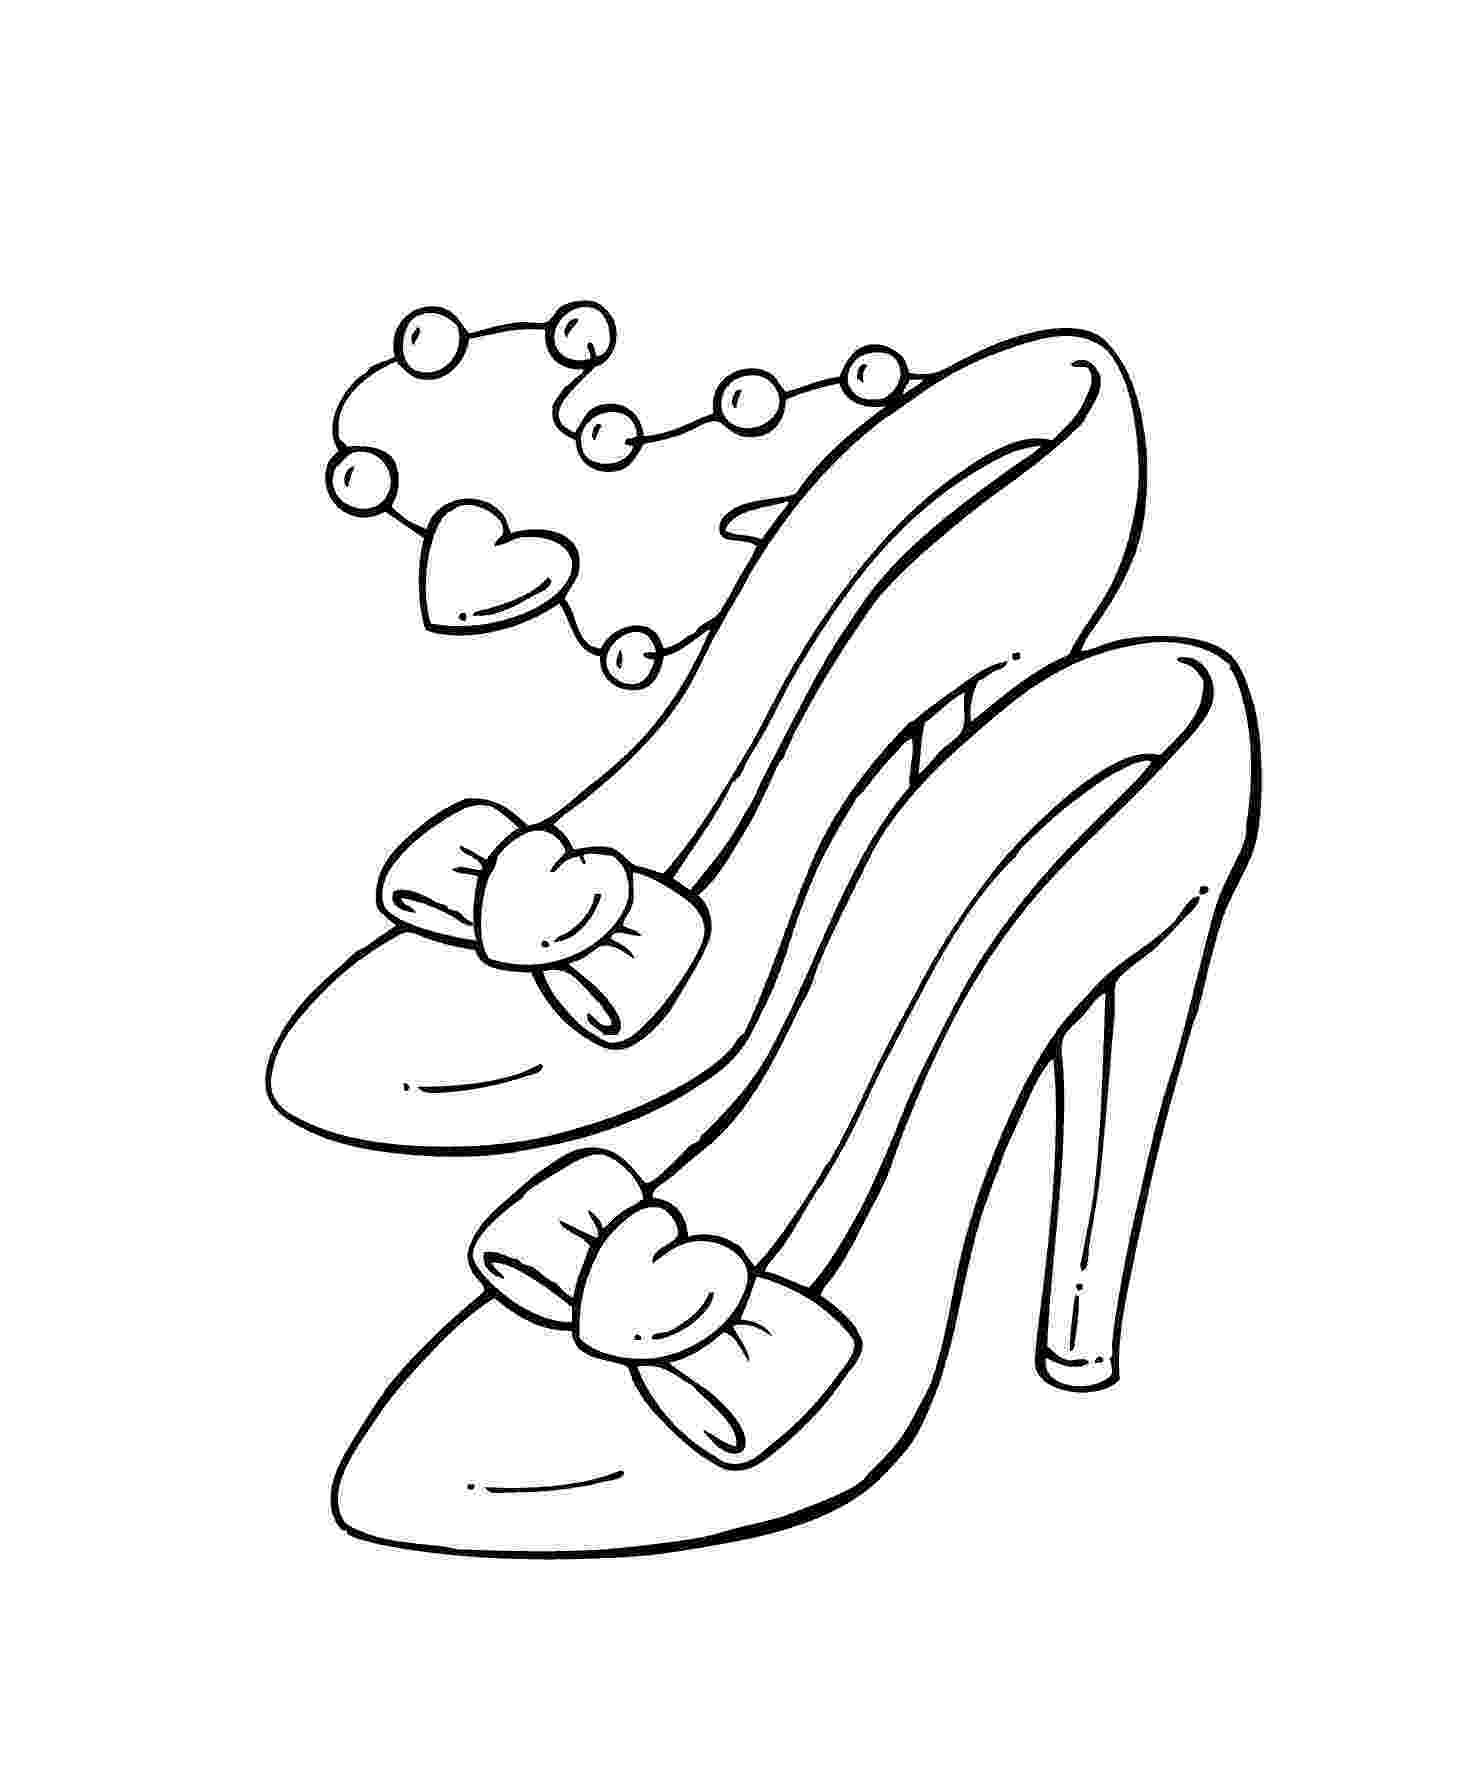 shoes for coloring pin on coloring pages pictures coloring shoes for 